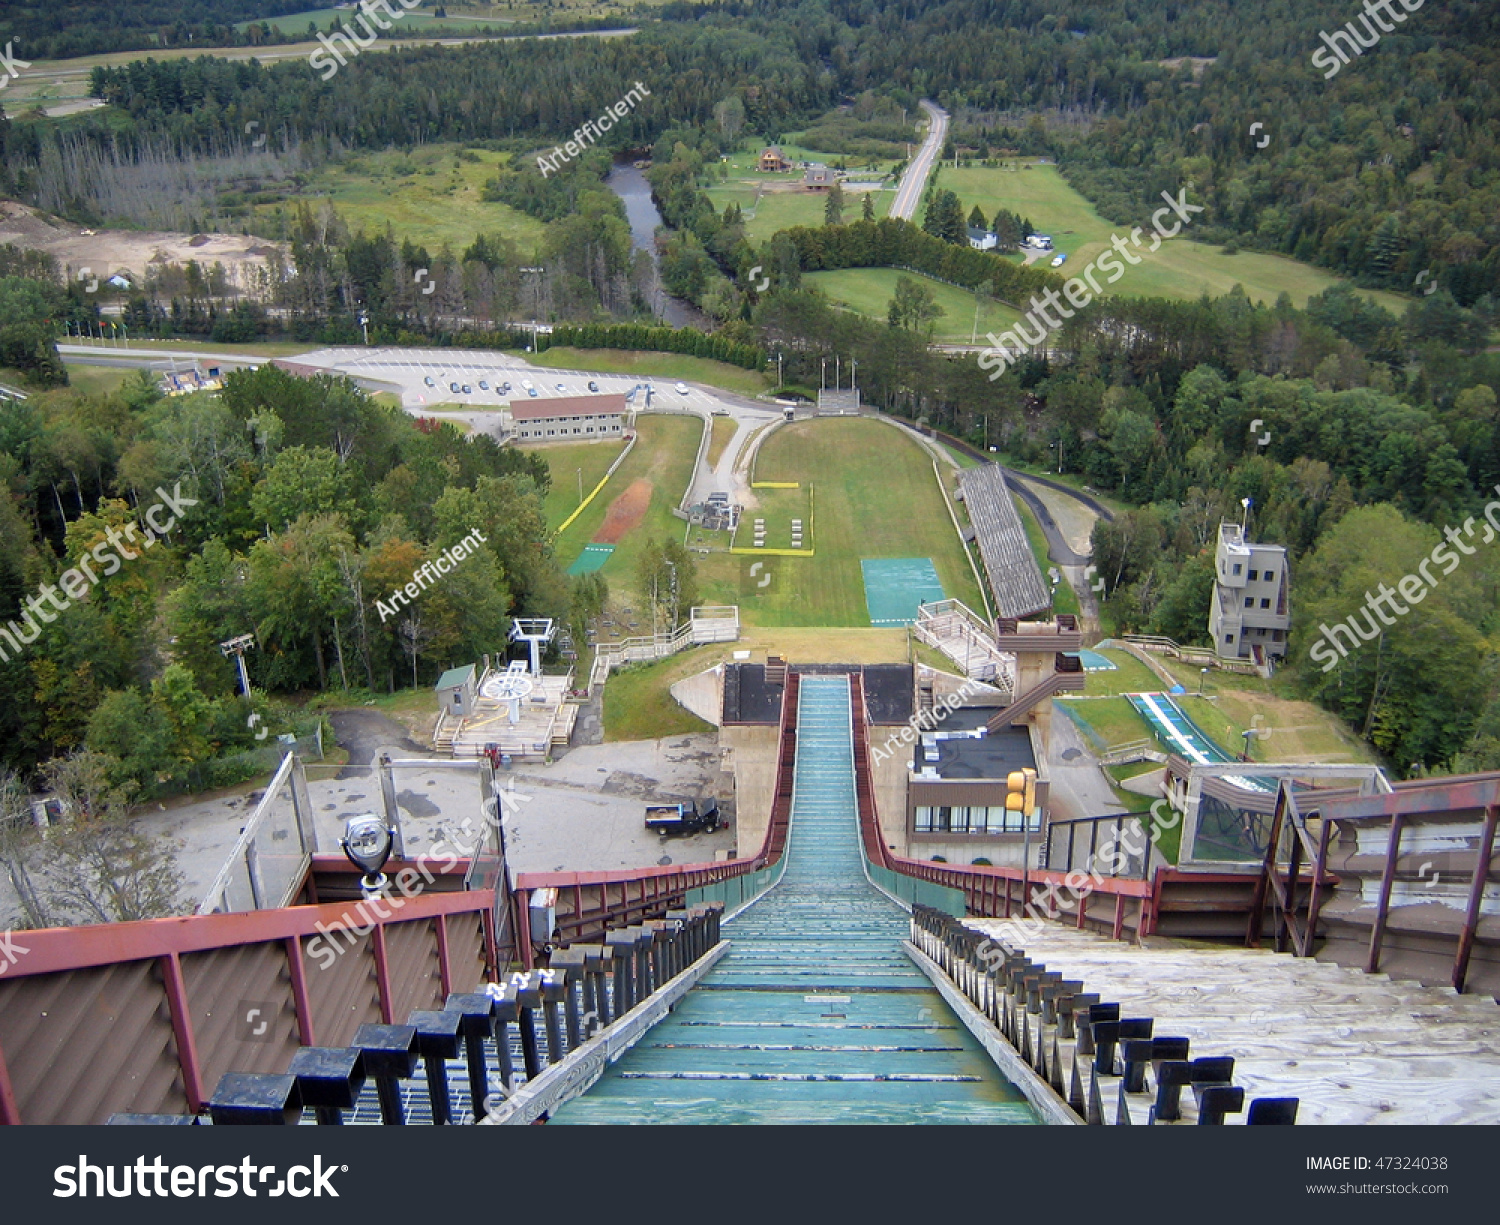 stock-photo-downhill-view-from-the-ski-jump-at-lake-placid-place-of-and-winter-olympic-games-47324038.jpg